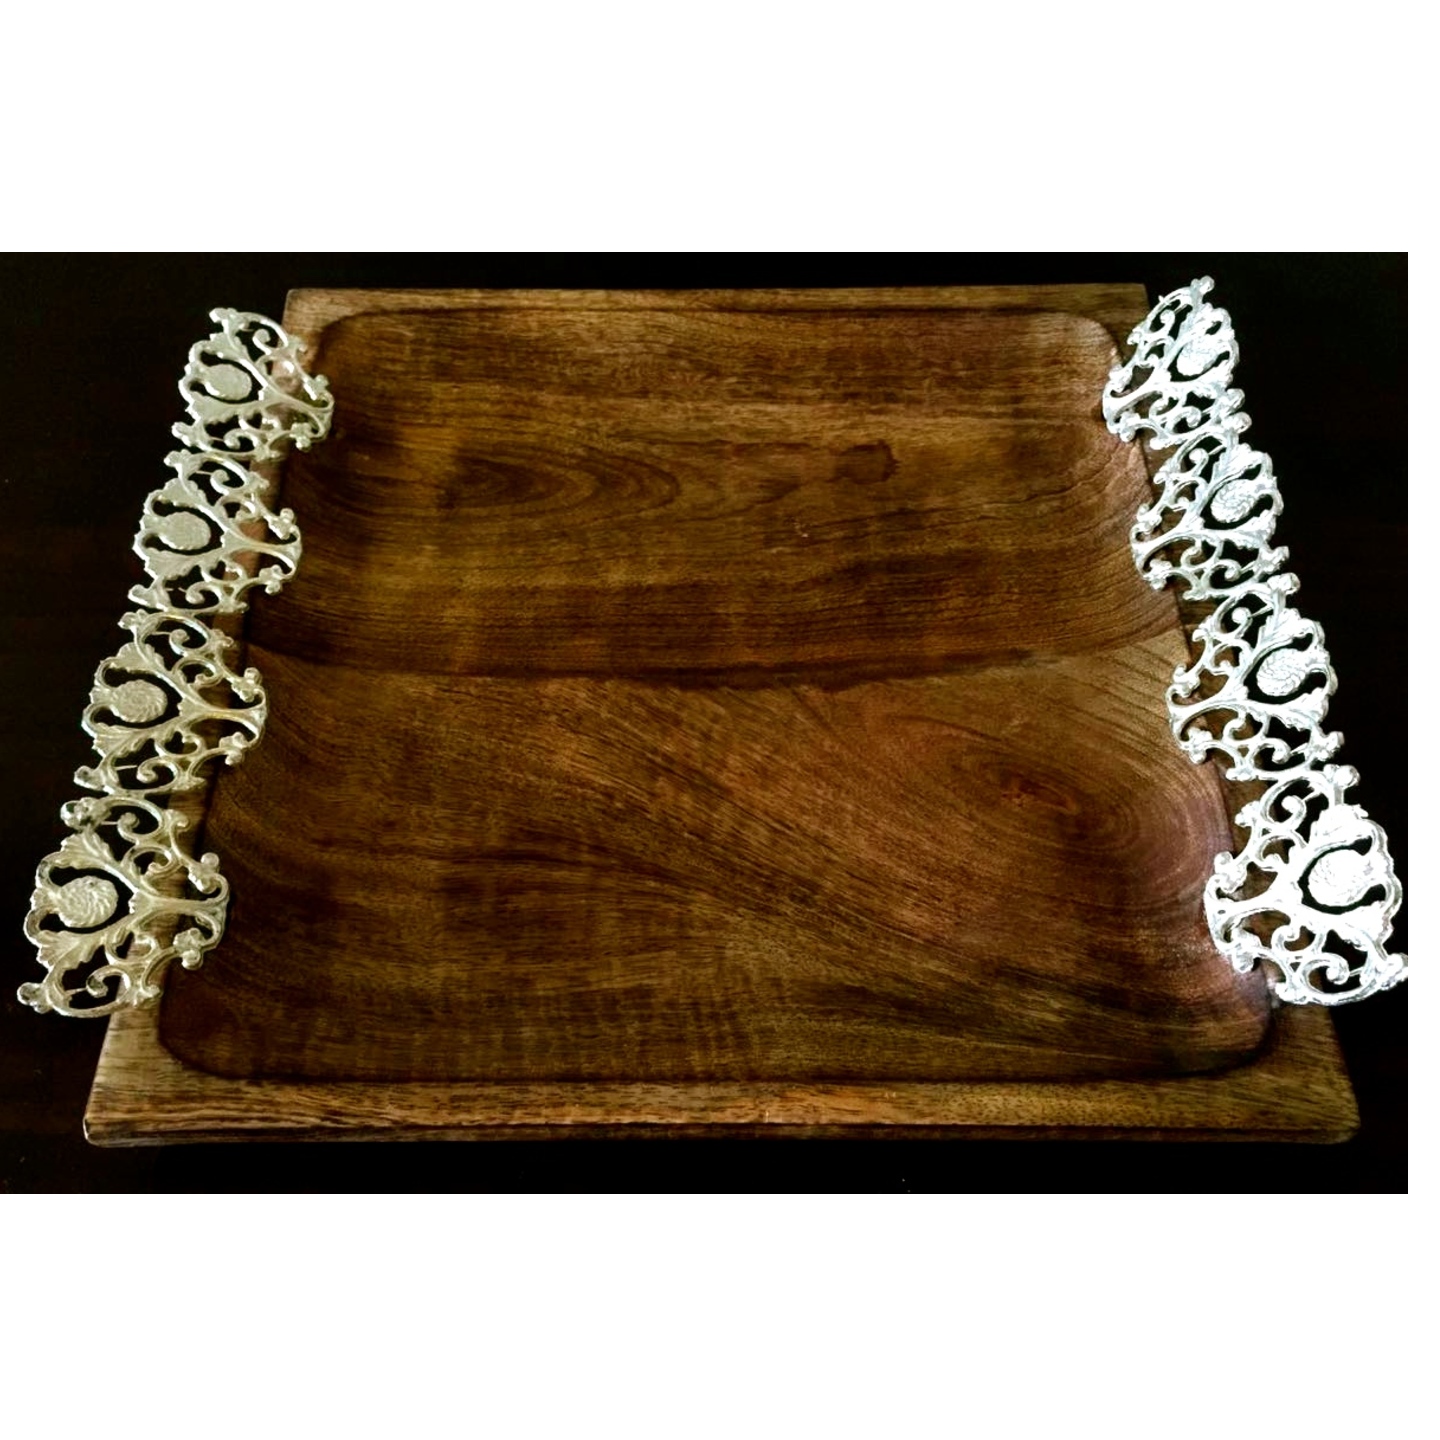 Wooden Jali Tray Small